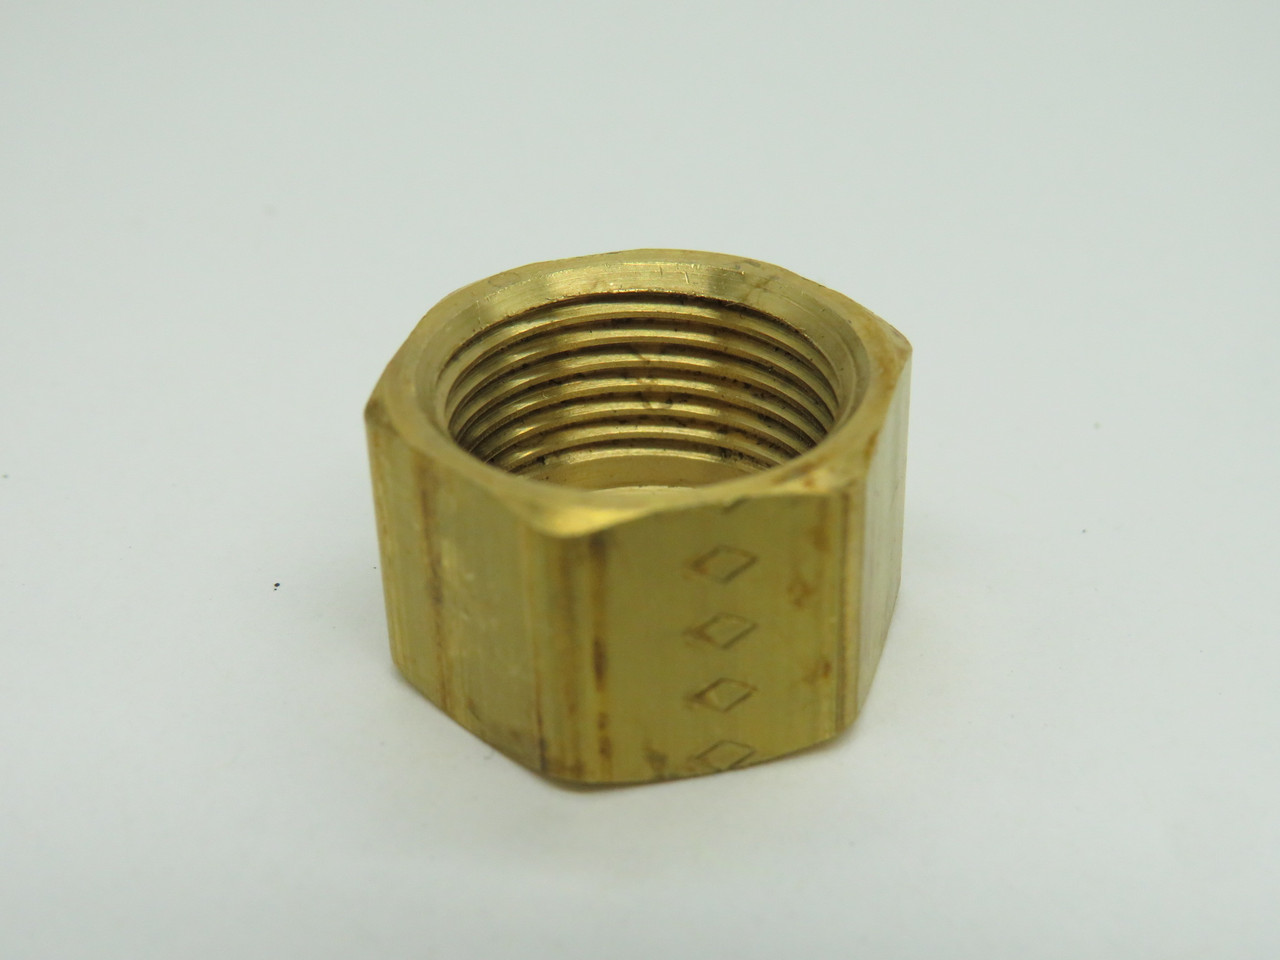 Generic Brass Compression Nut 1/2" Tube x 1/2" Width Lot of 8 USED